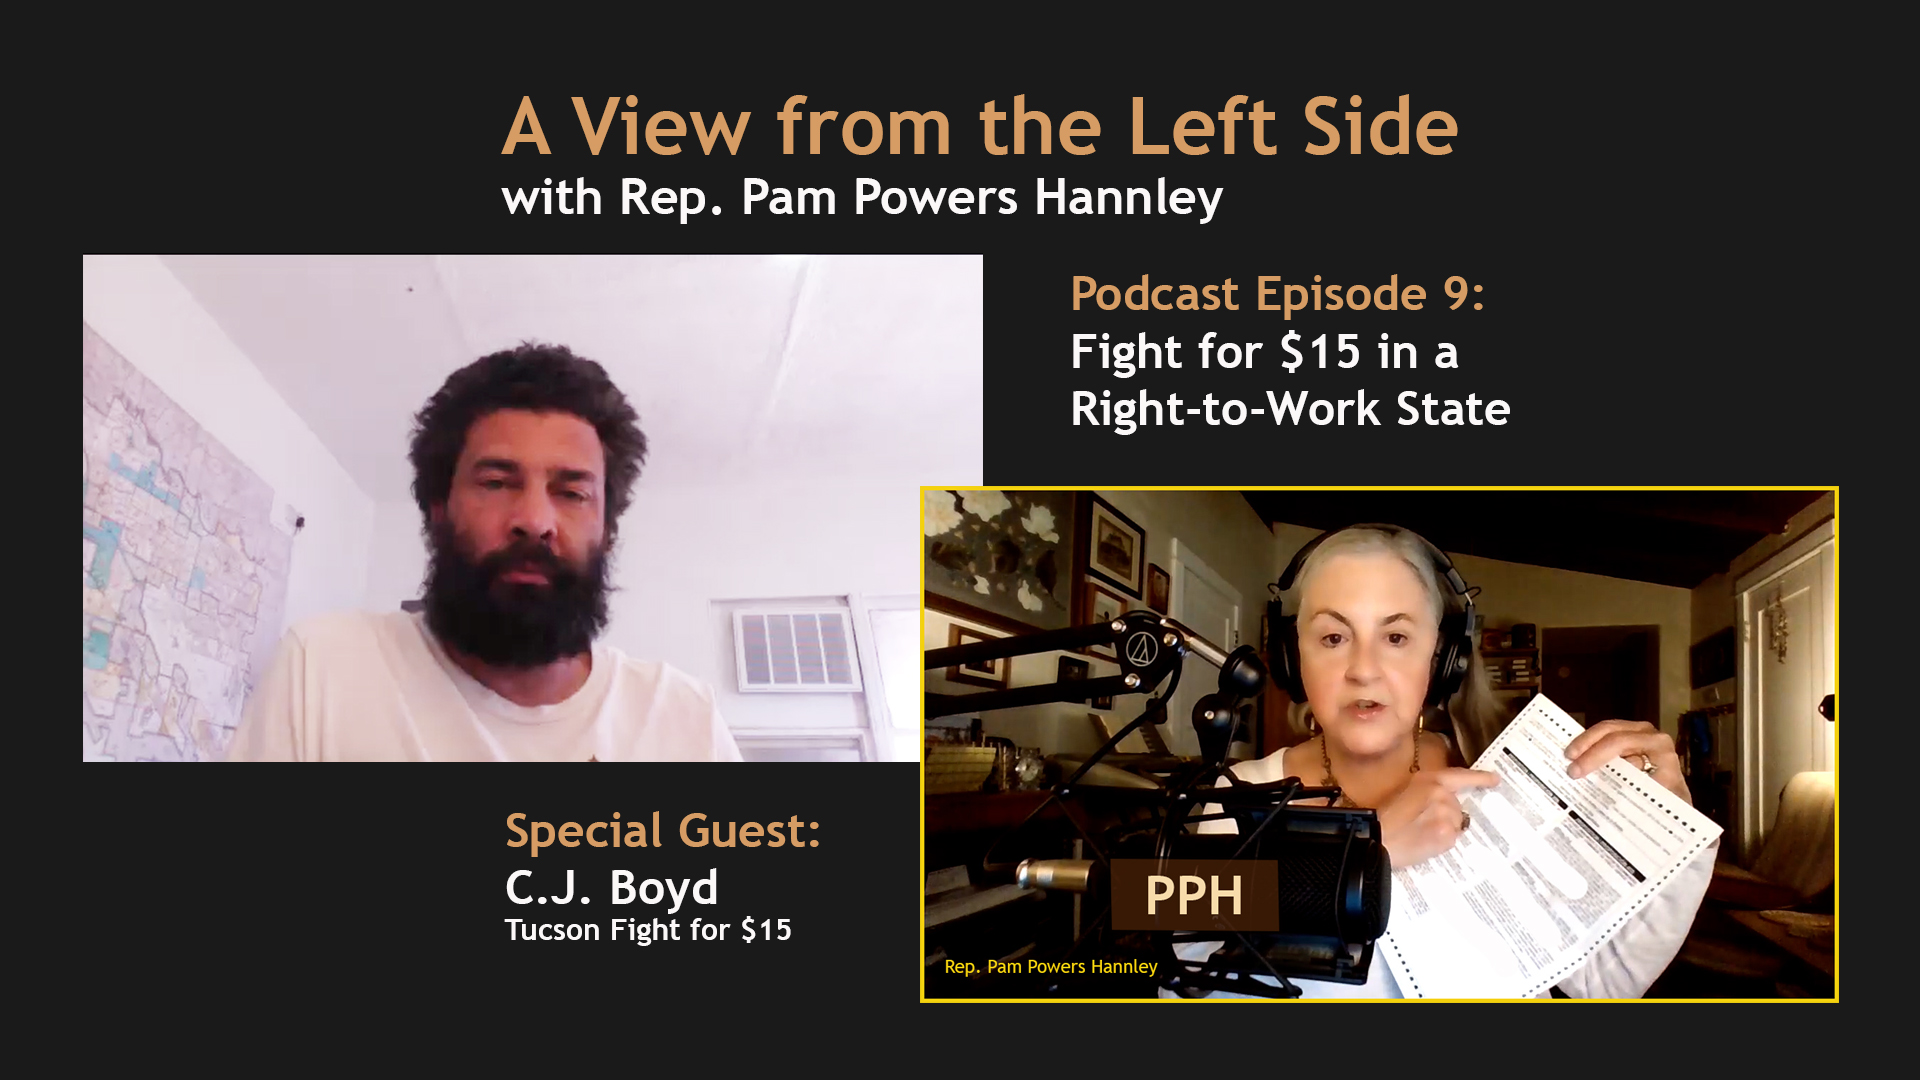 Rep. PPH's Podcast